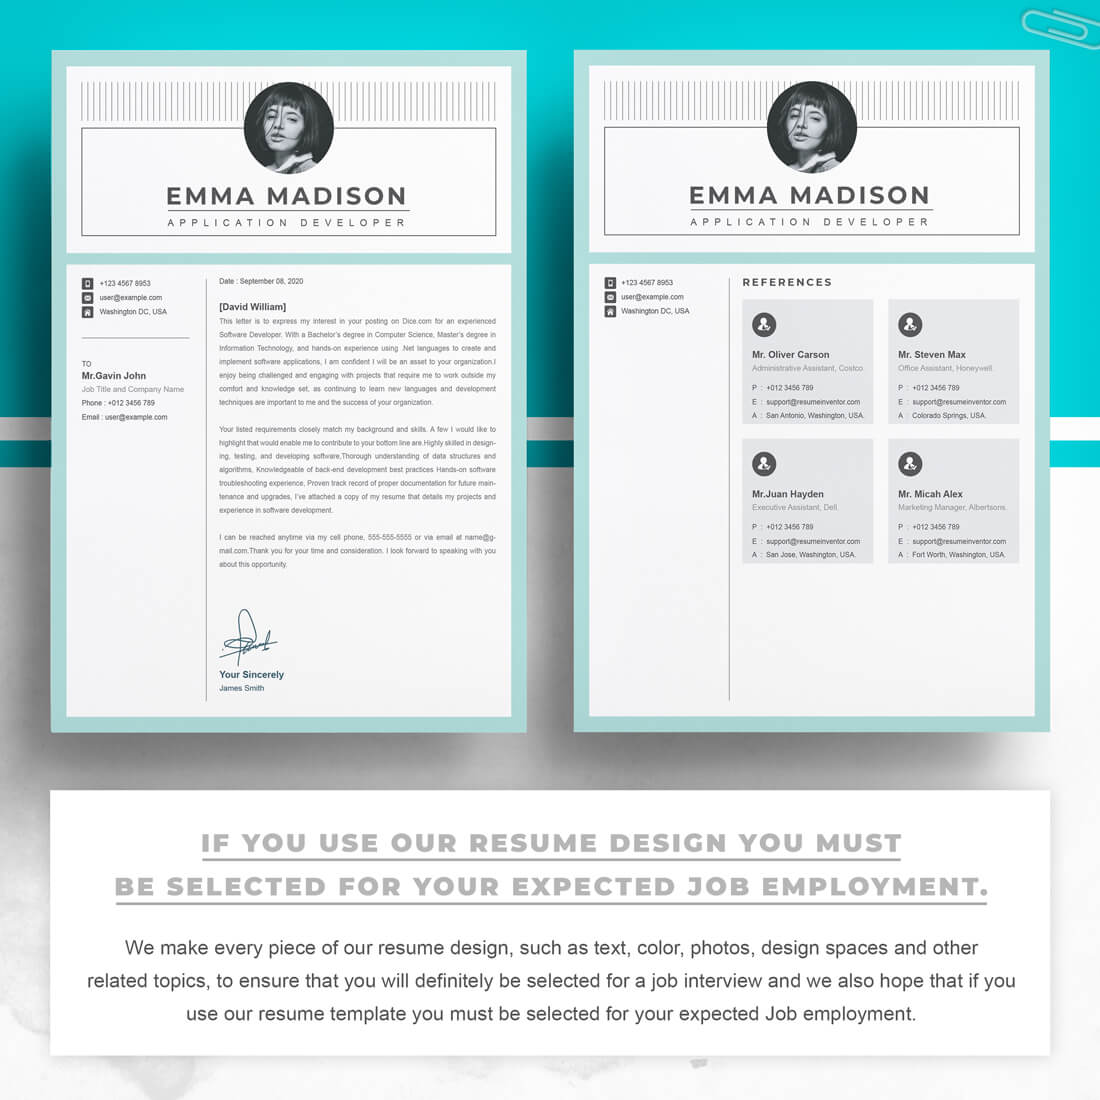 Two resume templates with a blue background.